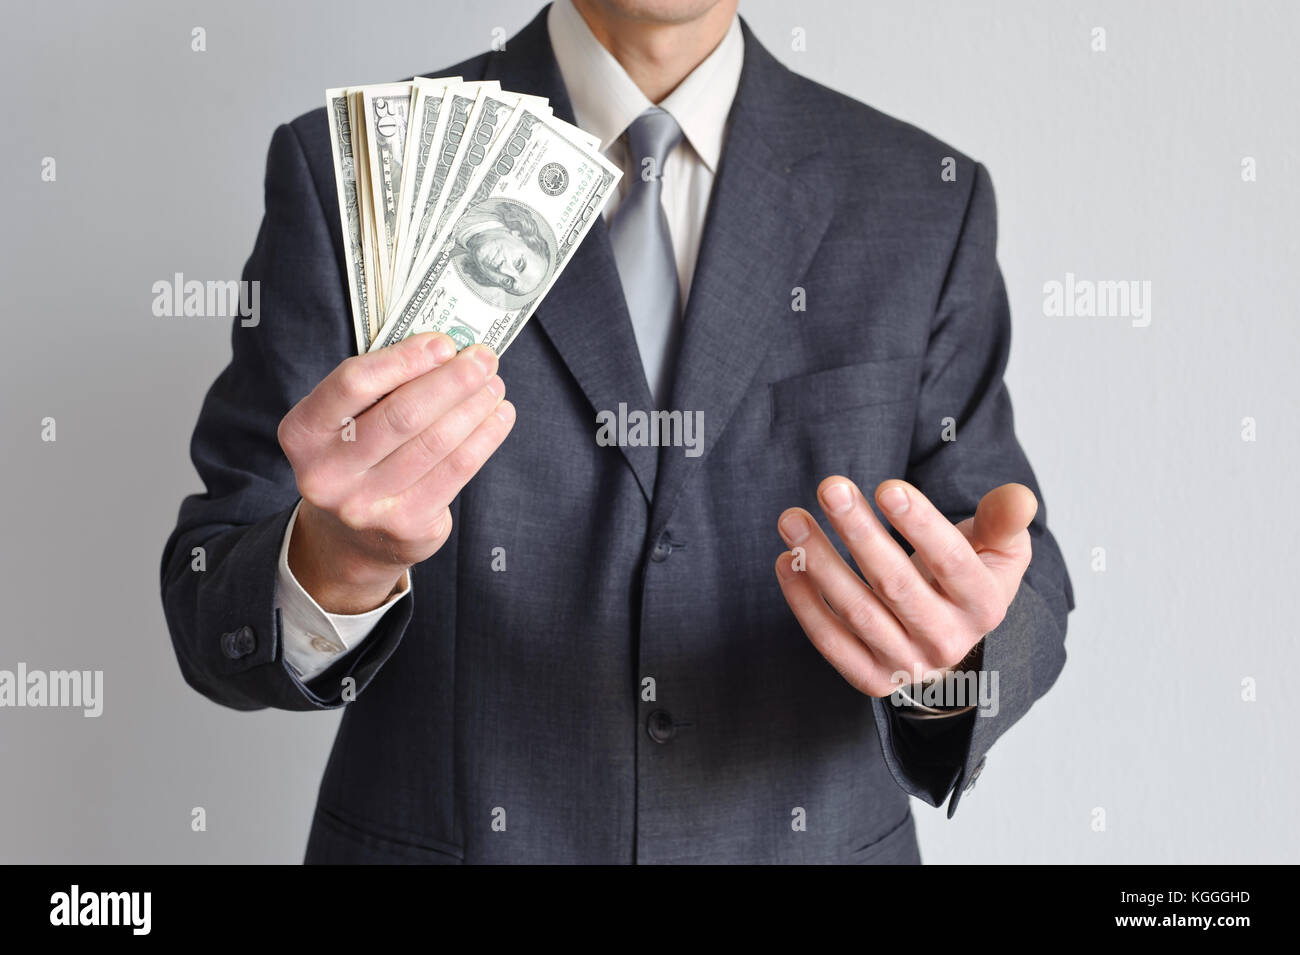 A man in a suit is holding holding dollar bills in one hand and the other is beckoning. Stock Photo